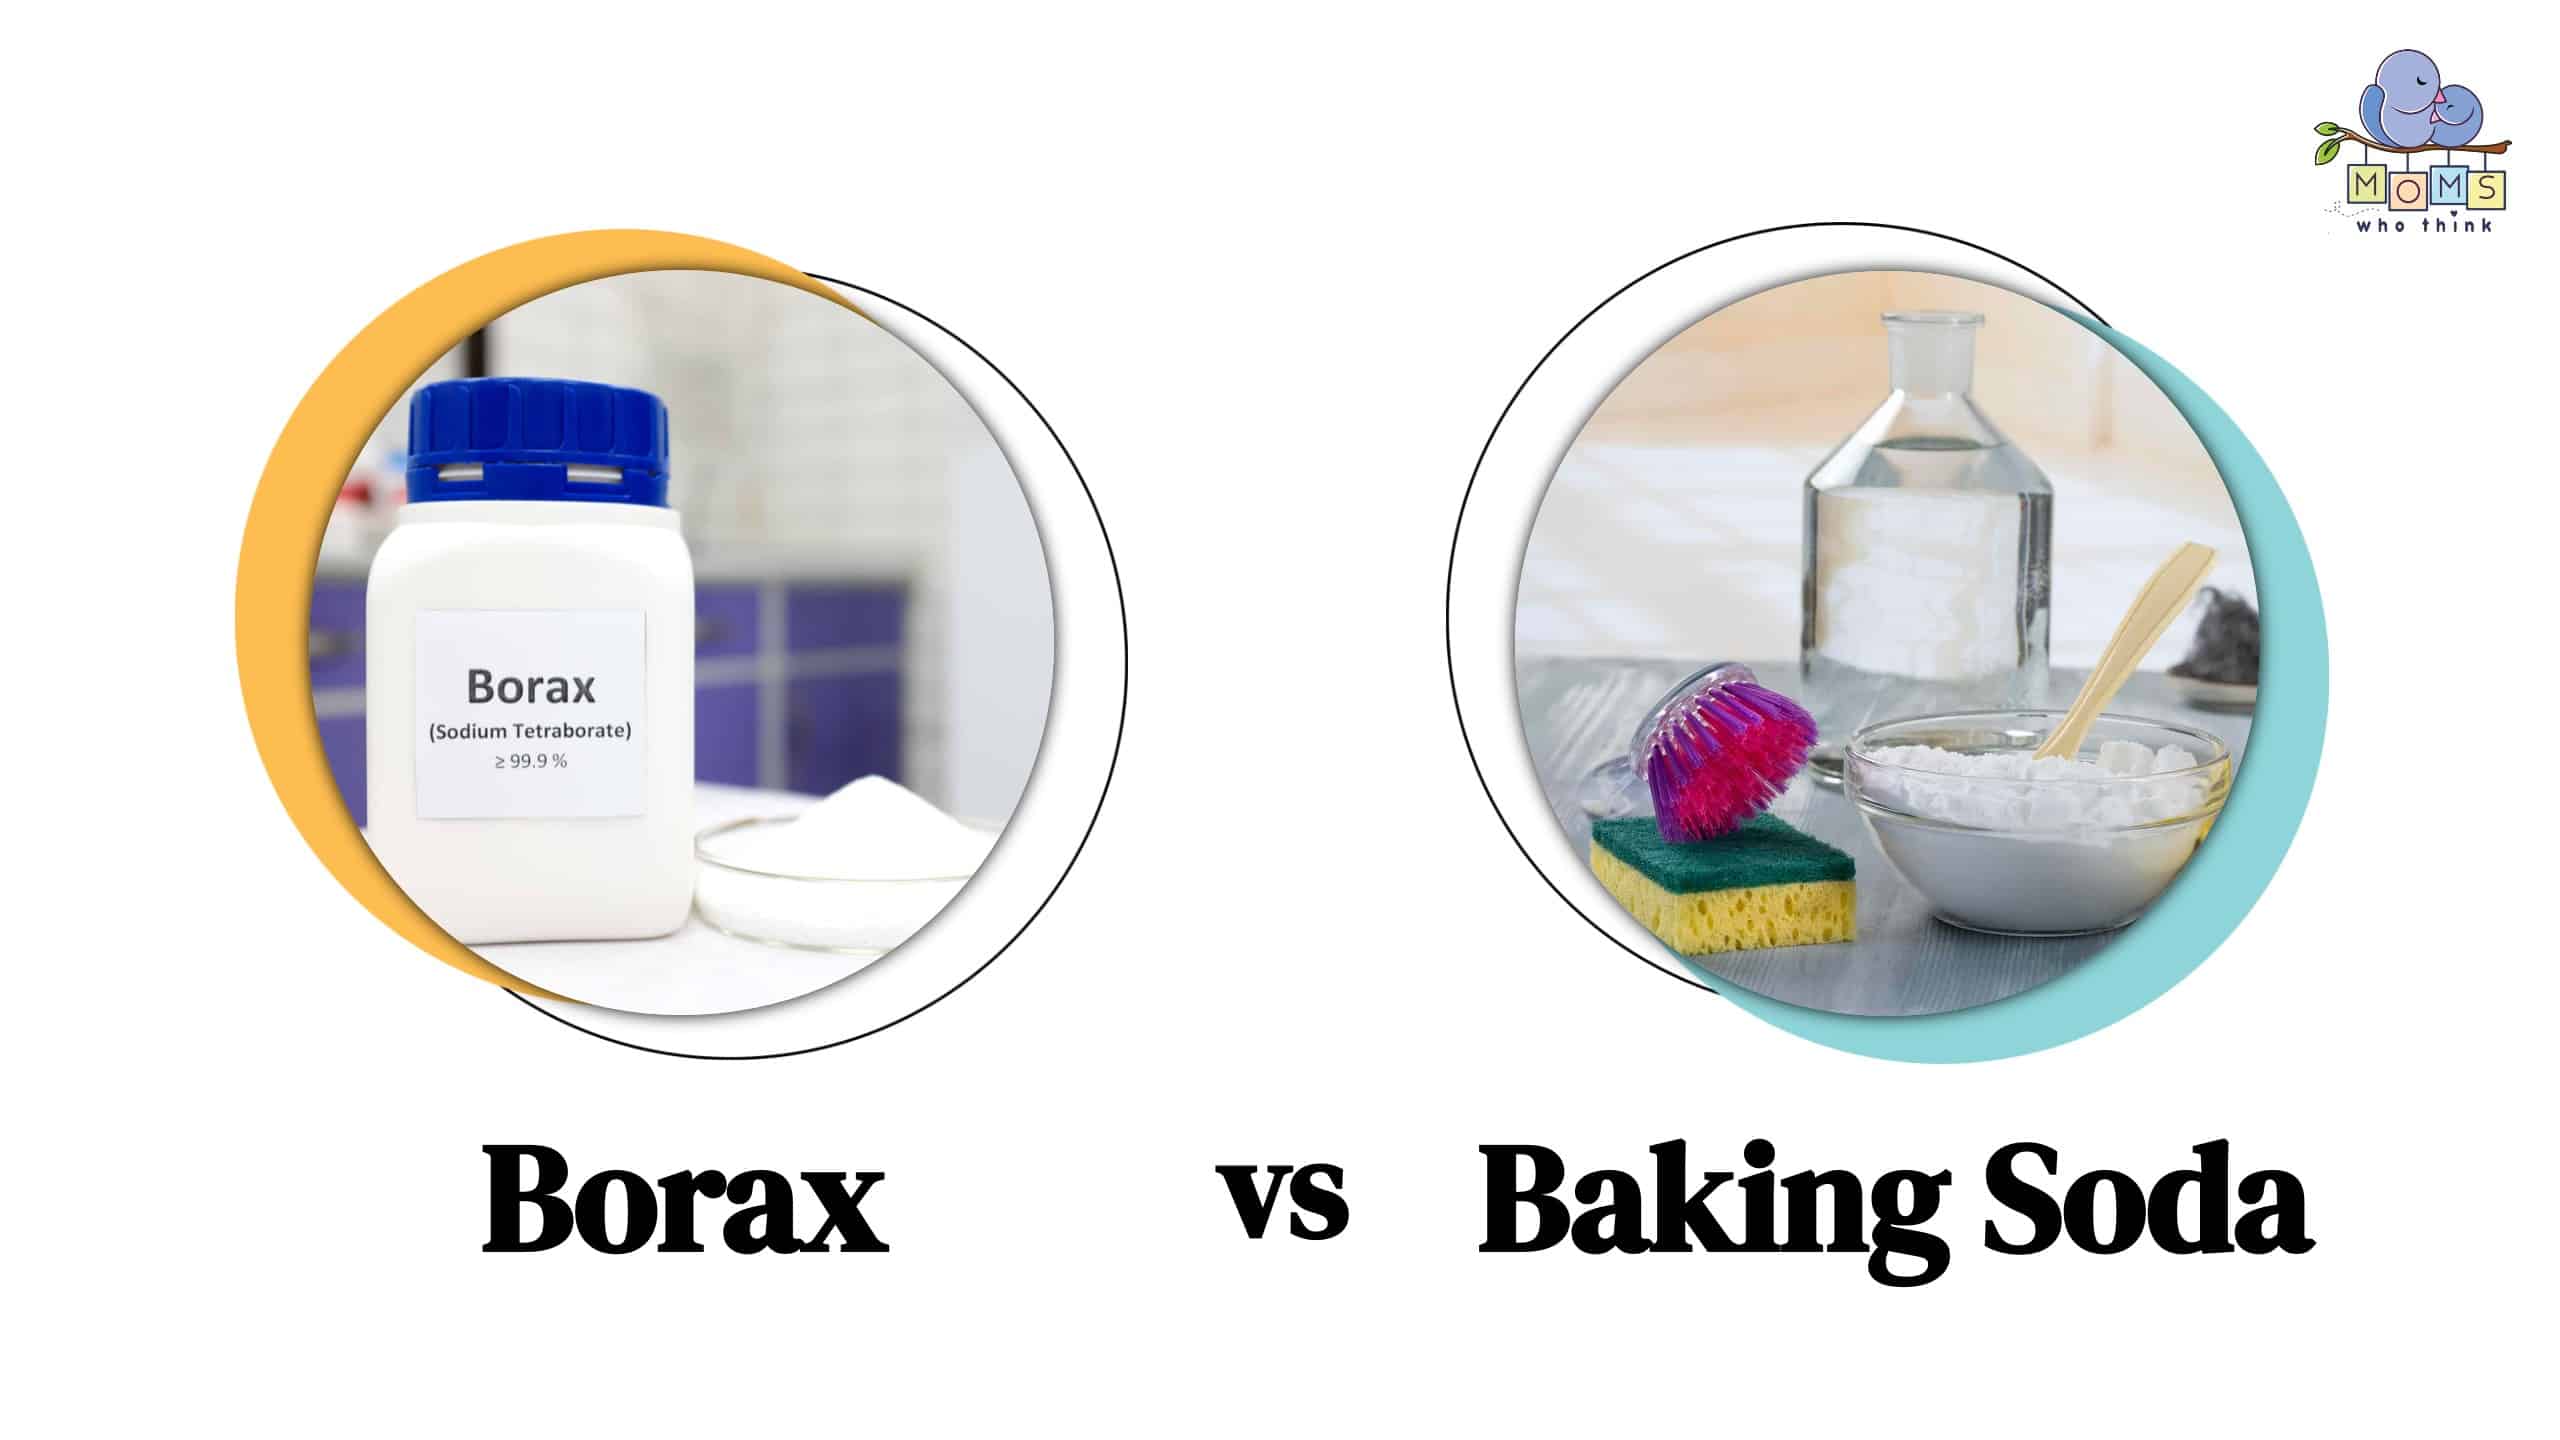 Baking Soda Vs Borax When To Use Each For Cleaning